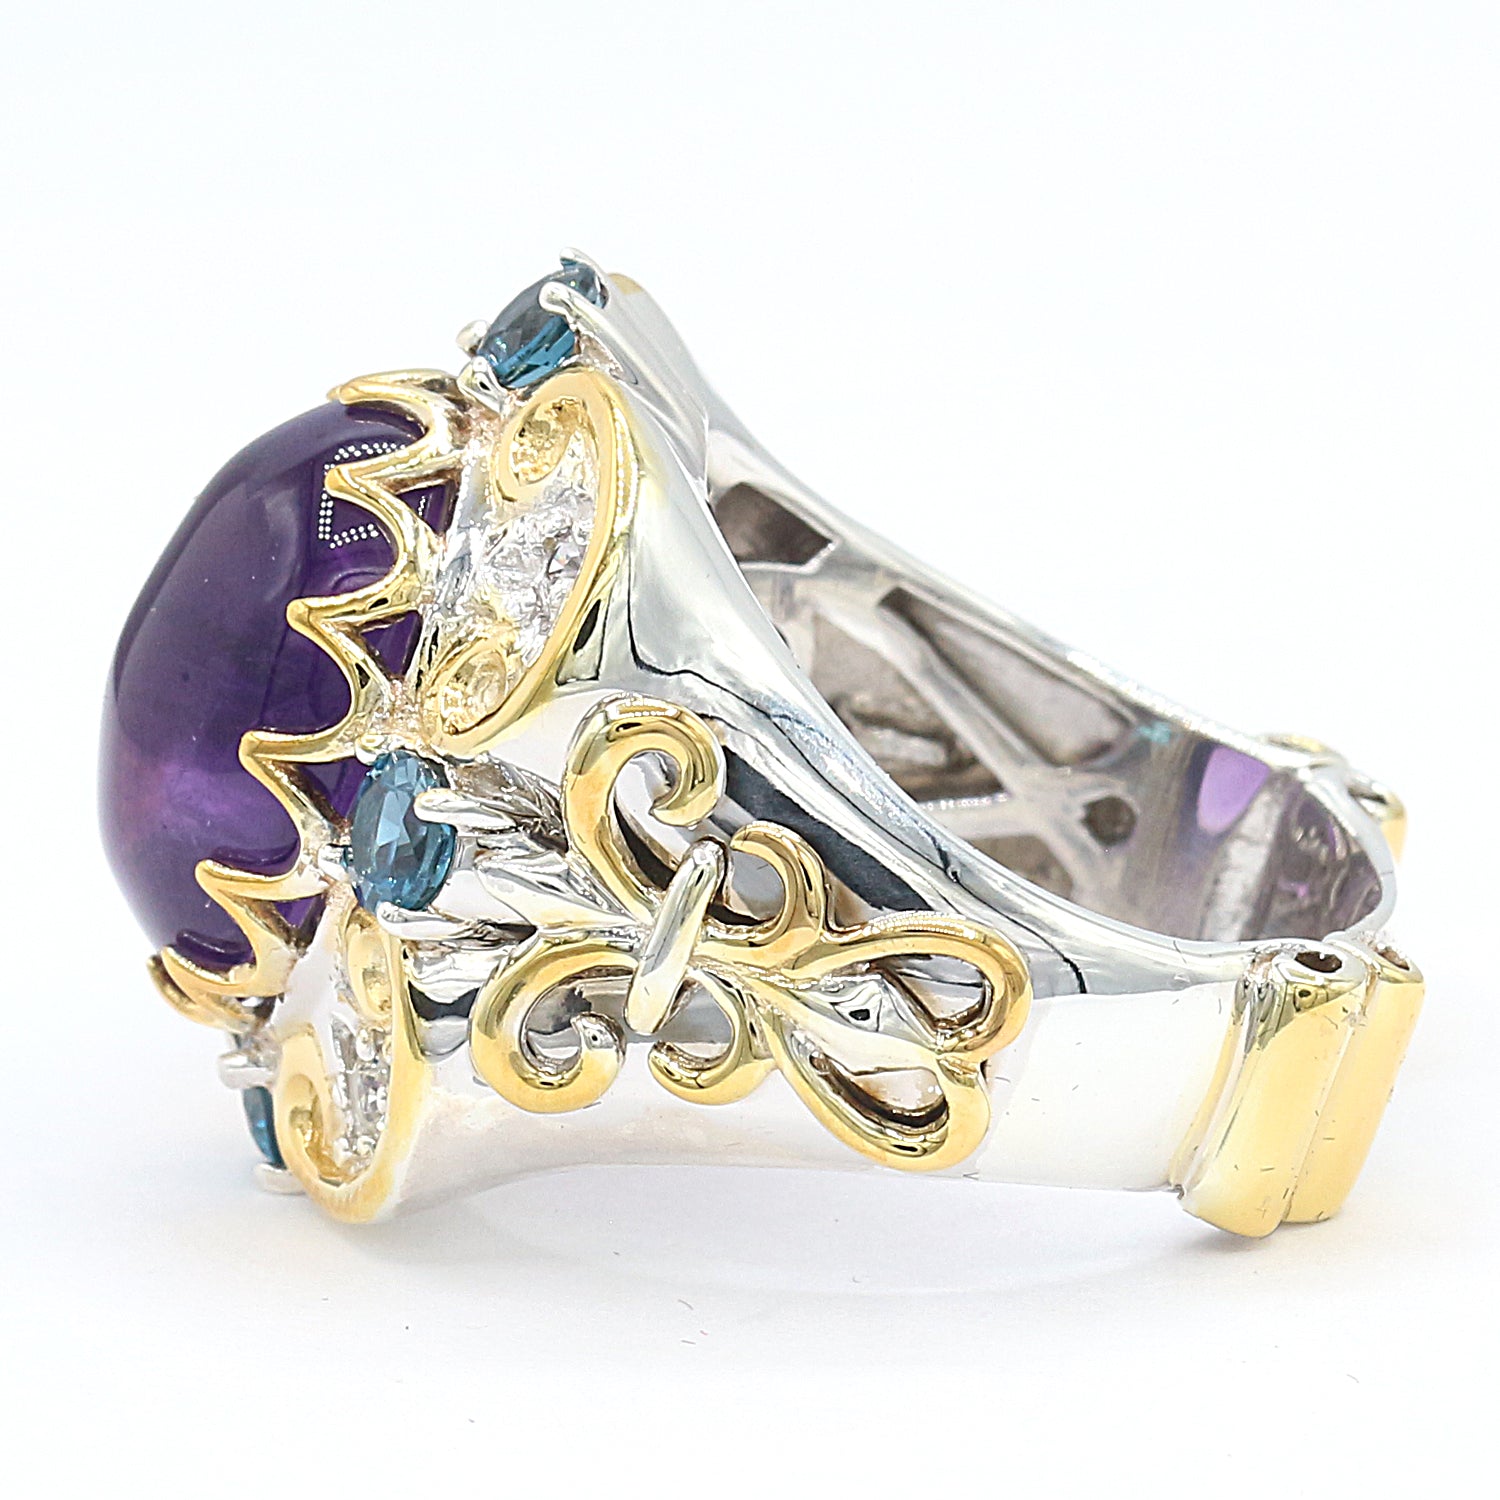 Gems en Vogue Amethyst, London Blue Topaz and White Sapphire Ring CANNOT BE RESIZED